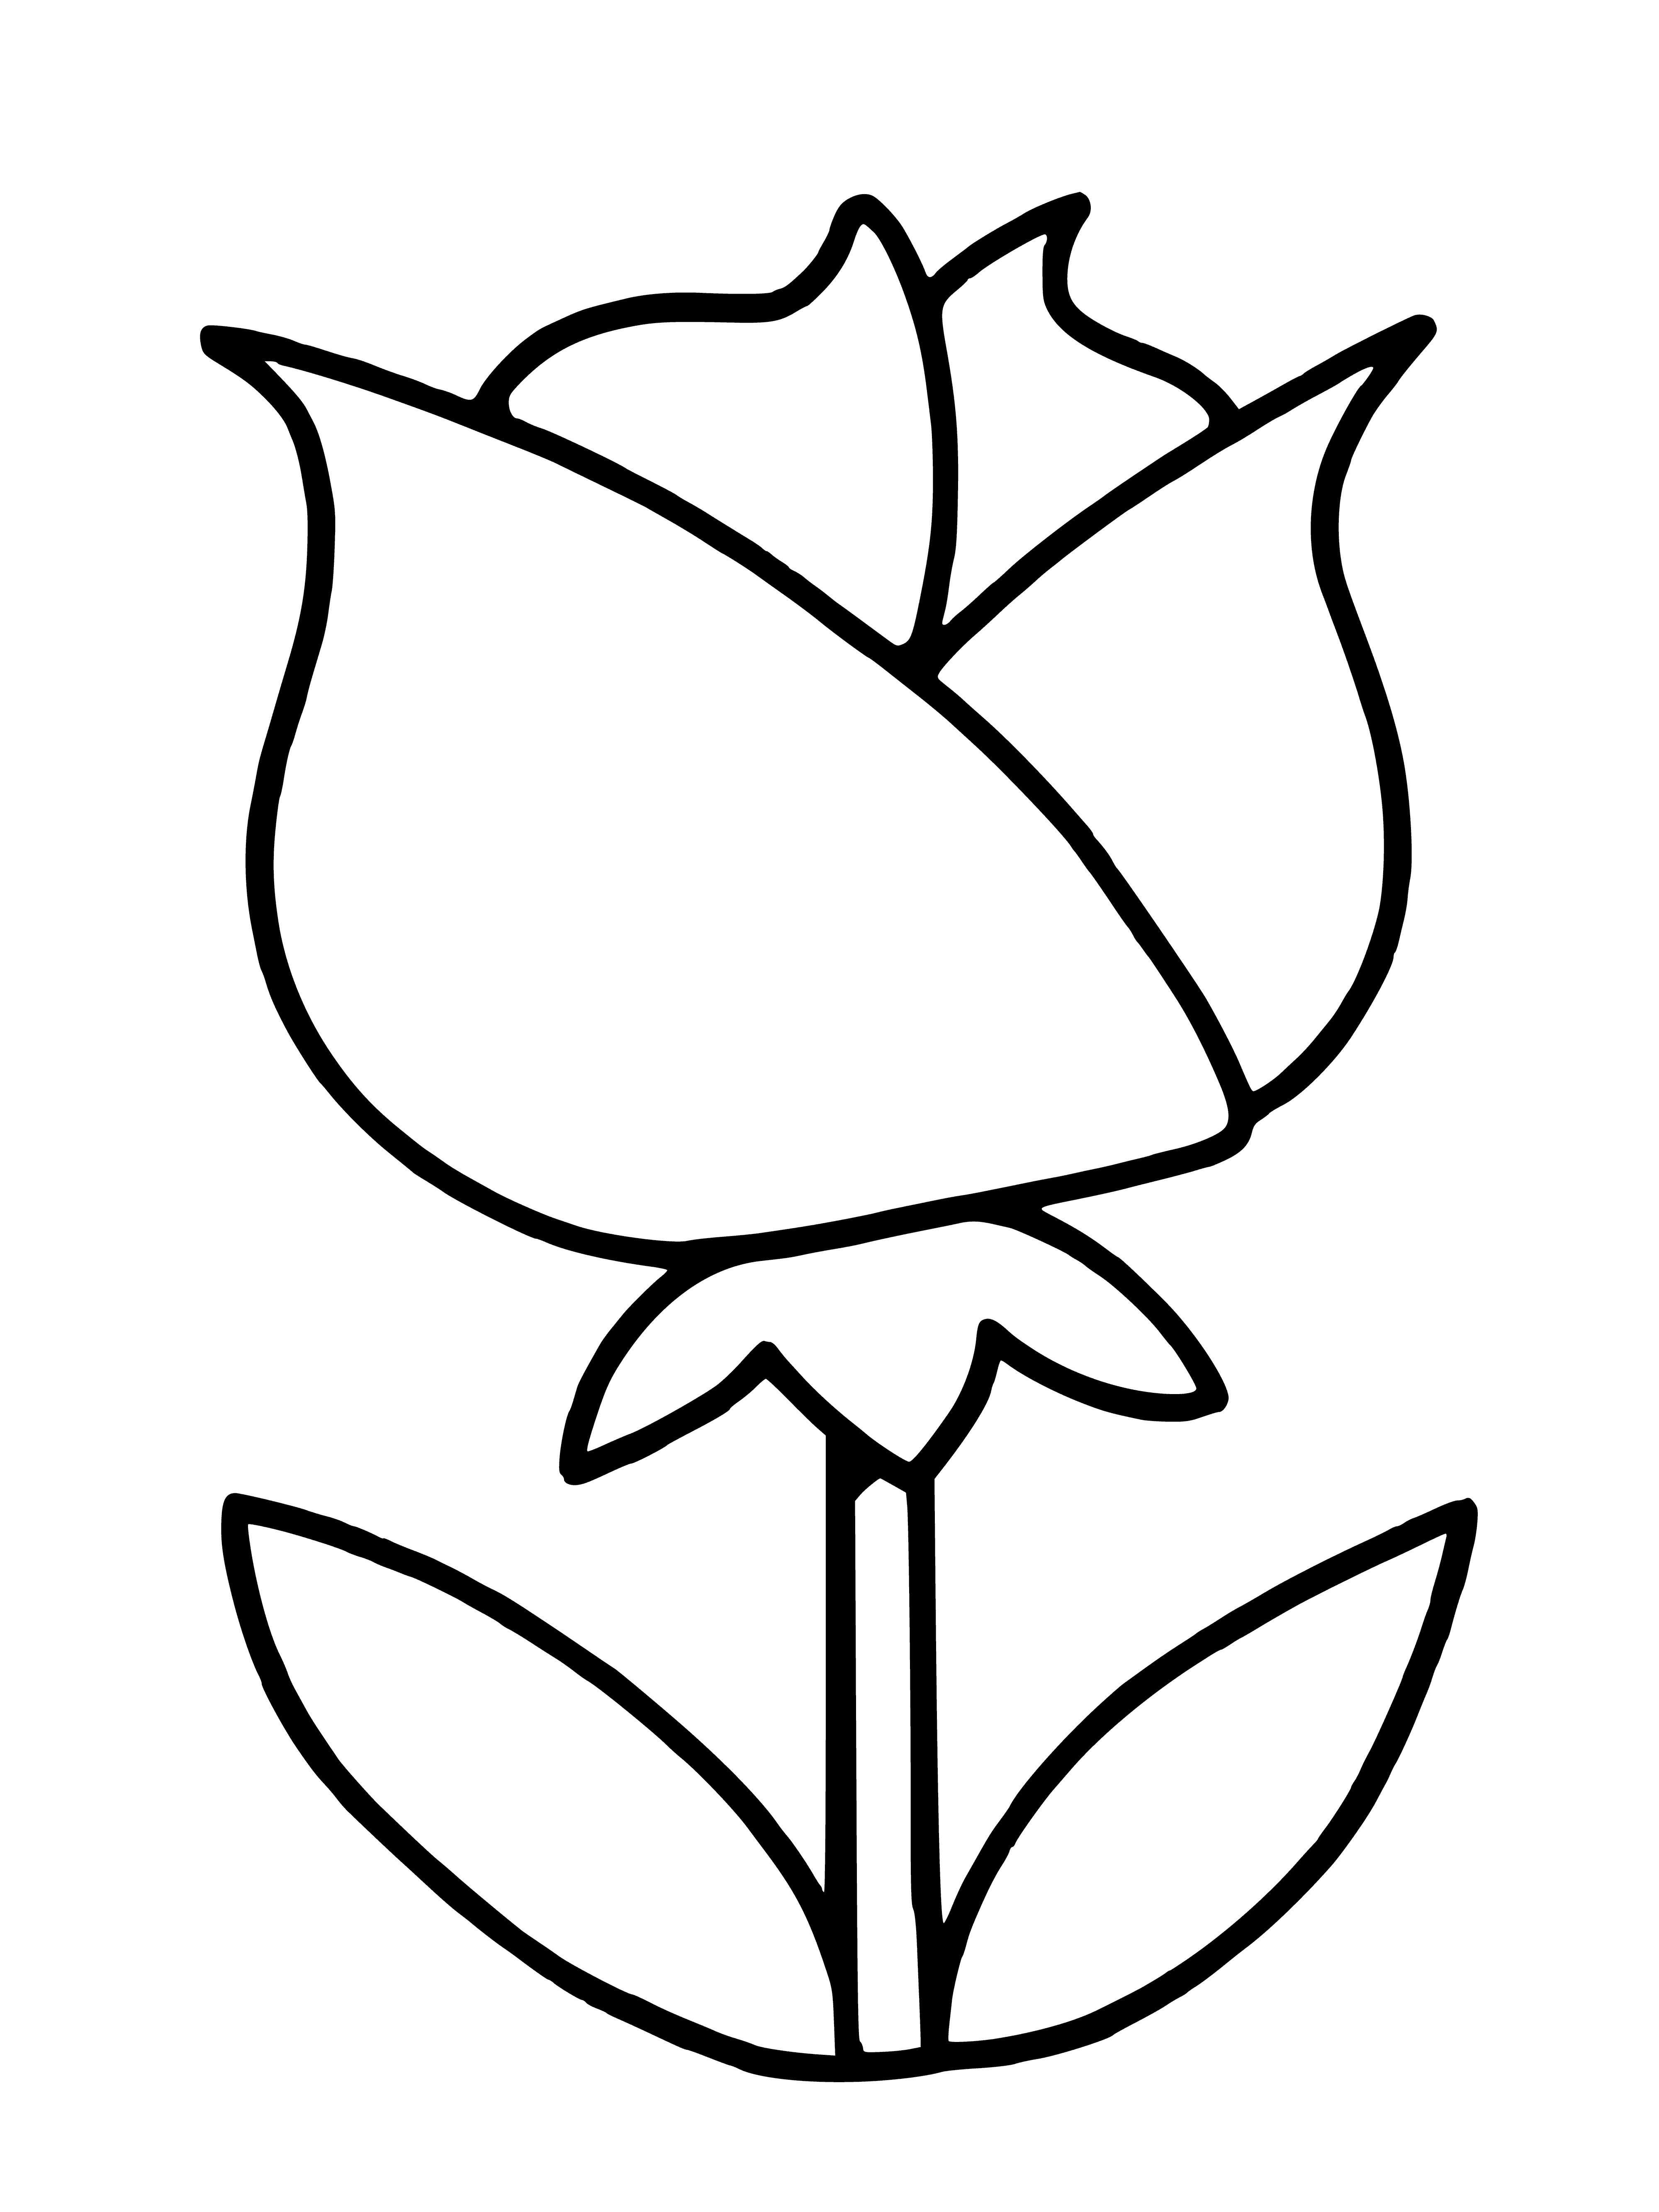 coloring page: The rose is a beautiful flower with deep red petals, growing out of a green stem with leaves. #flowers